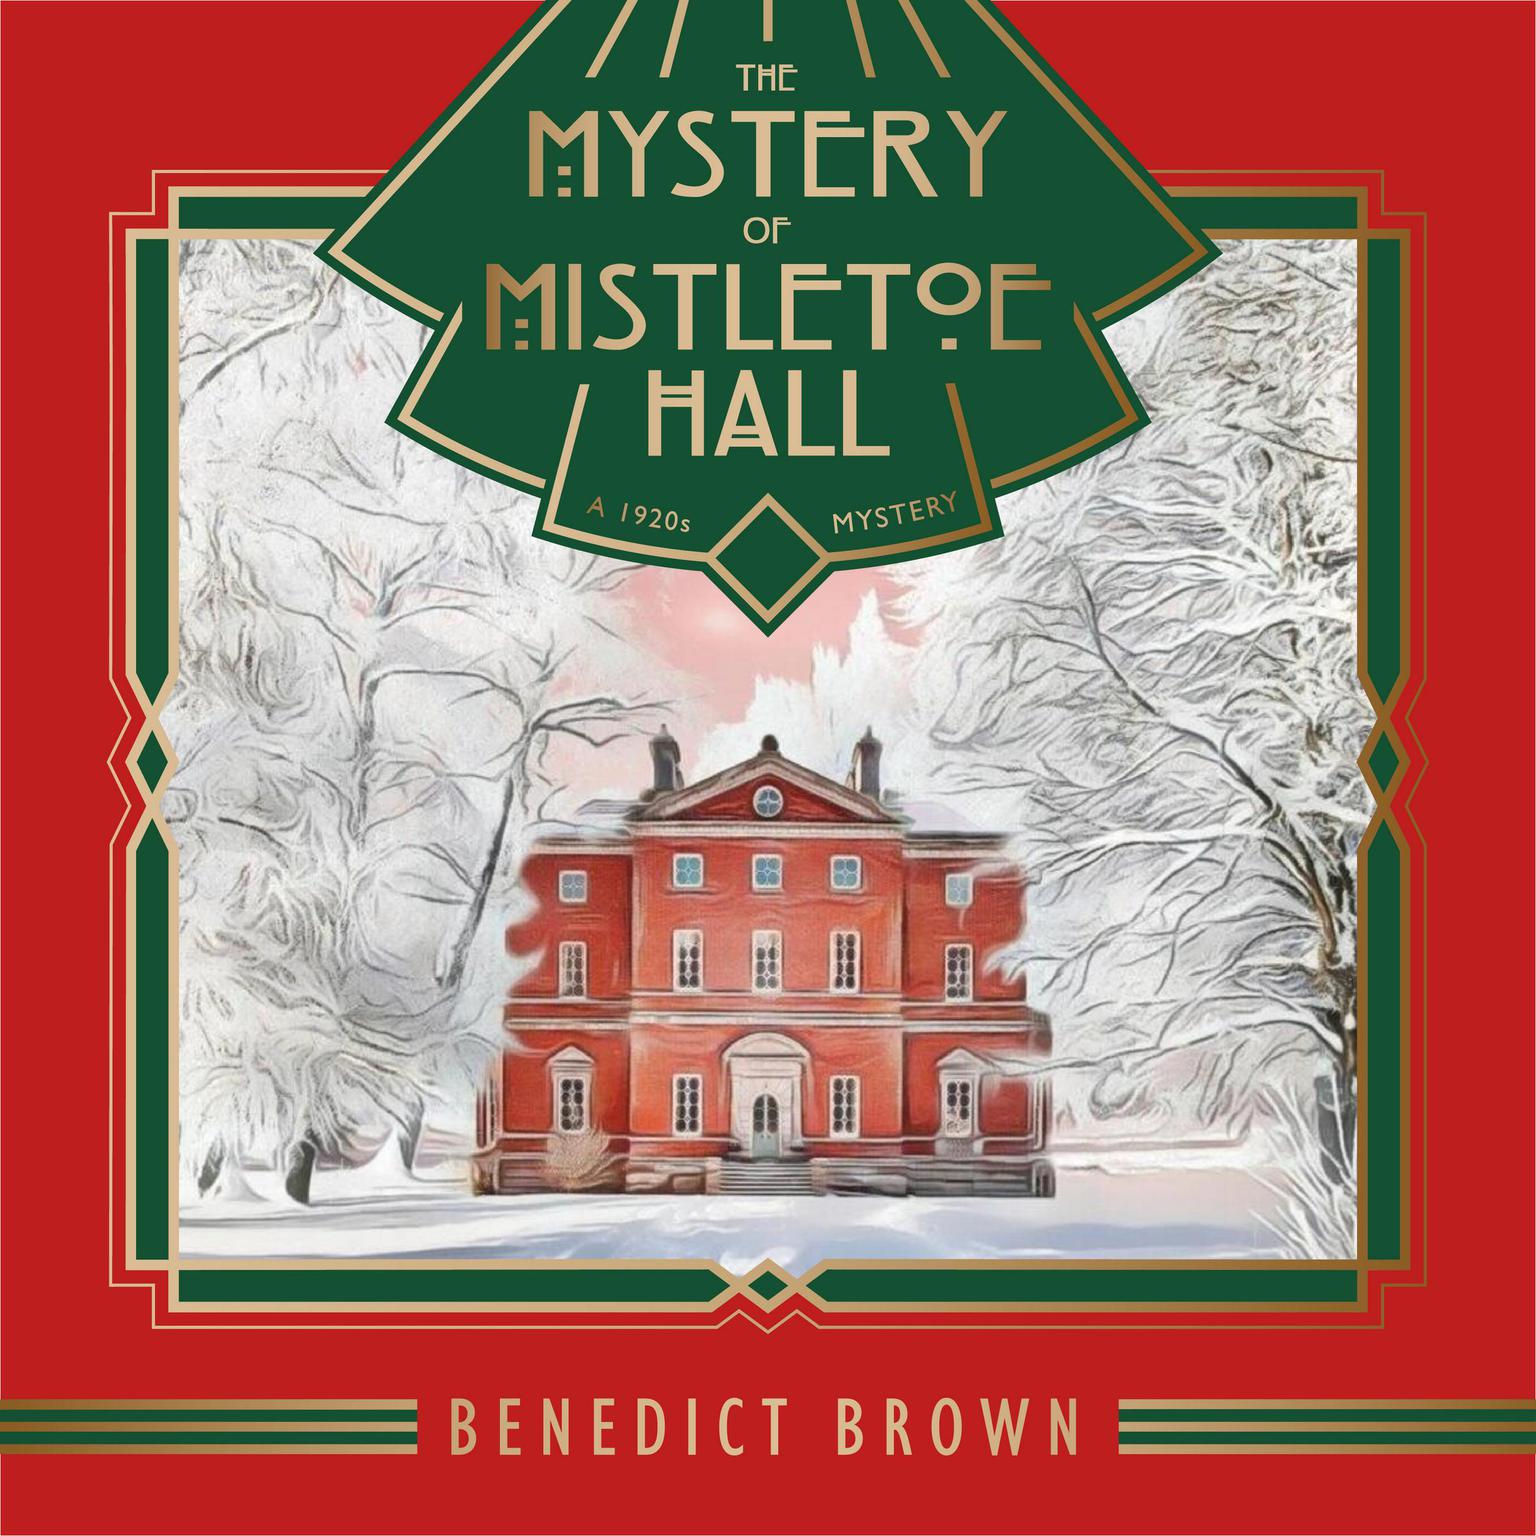 The Mystery of Mistletoe Hall: A 1920s Mystery Audiobook, by Benedict Brown